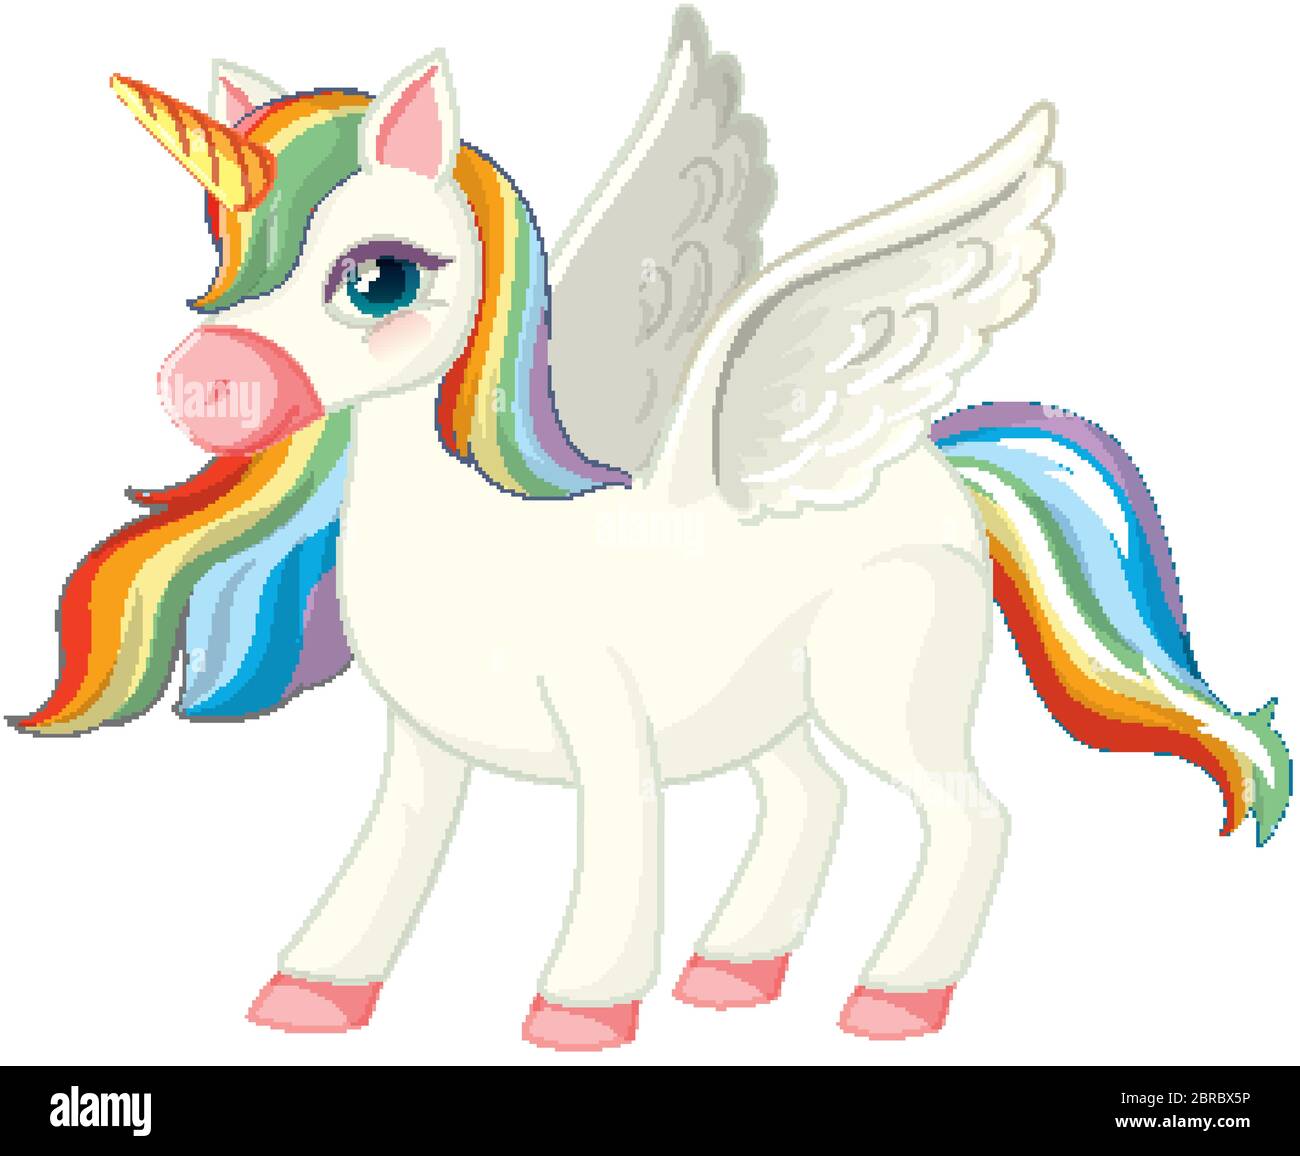 Cute Rainbow Unicorn In Standing Position On White Background